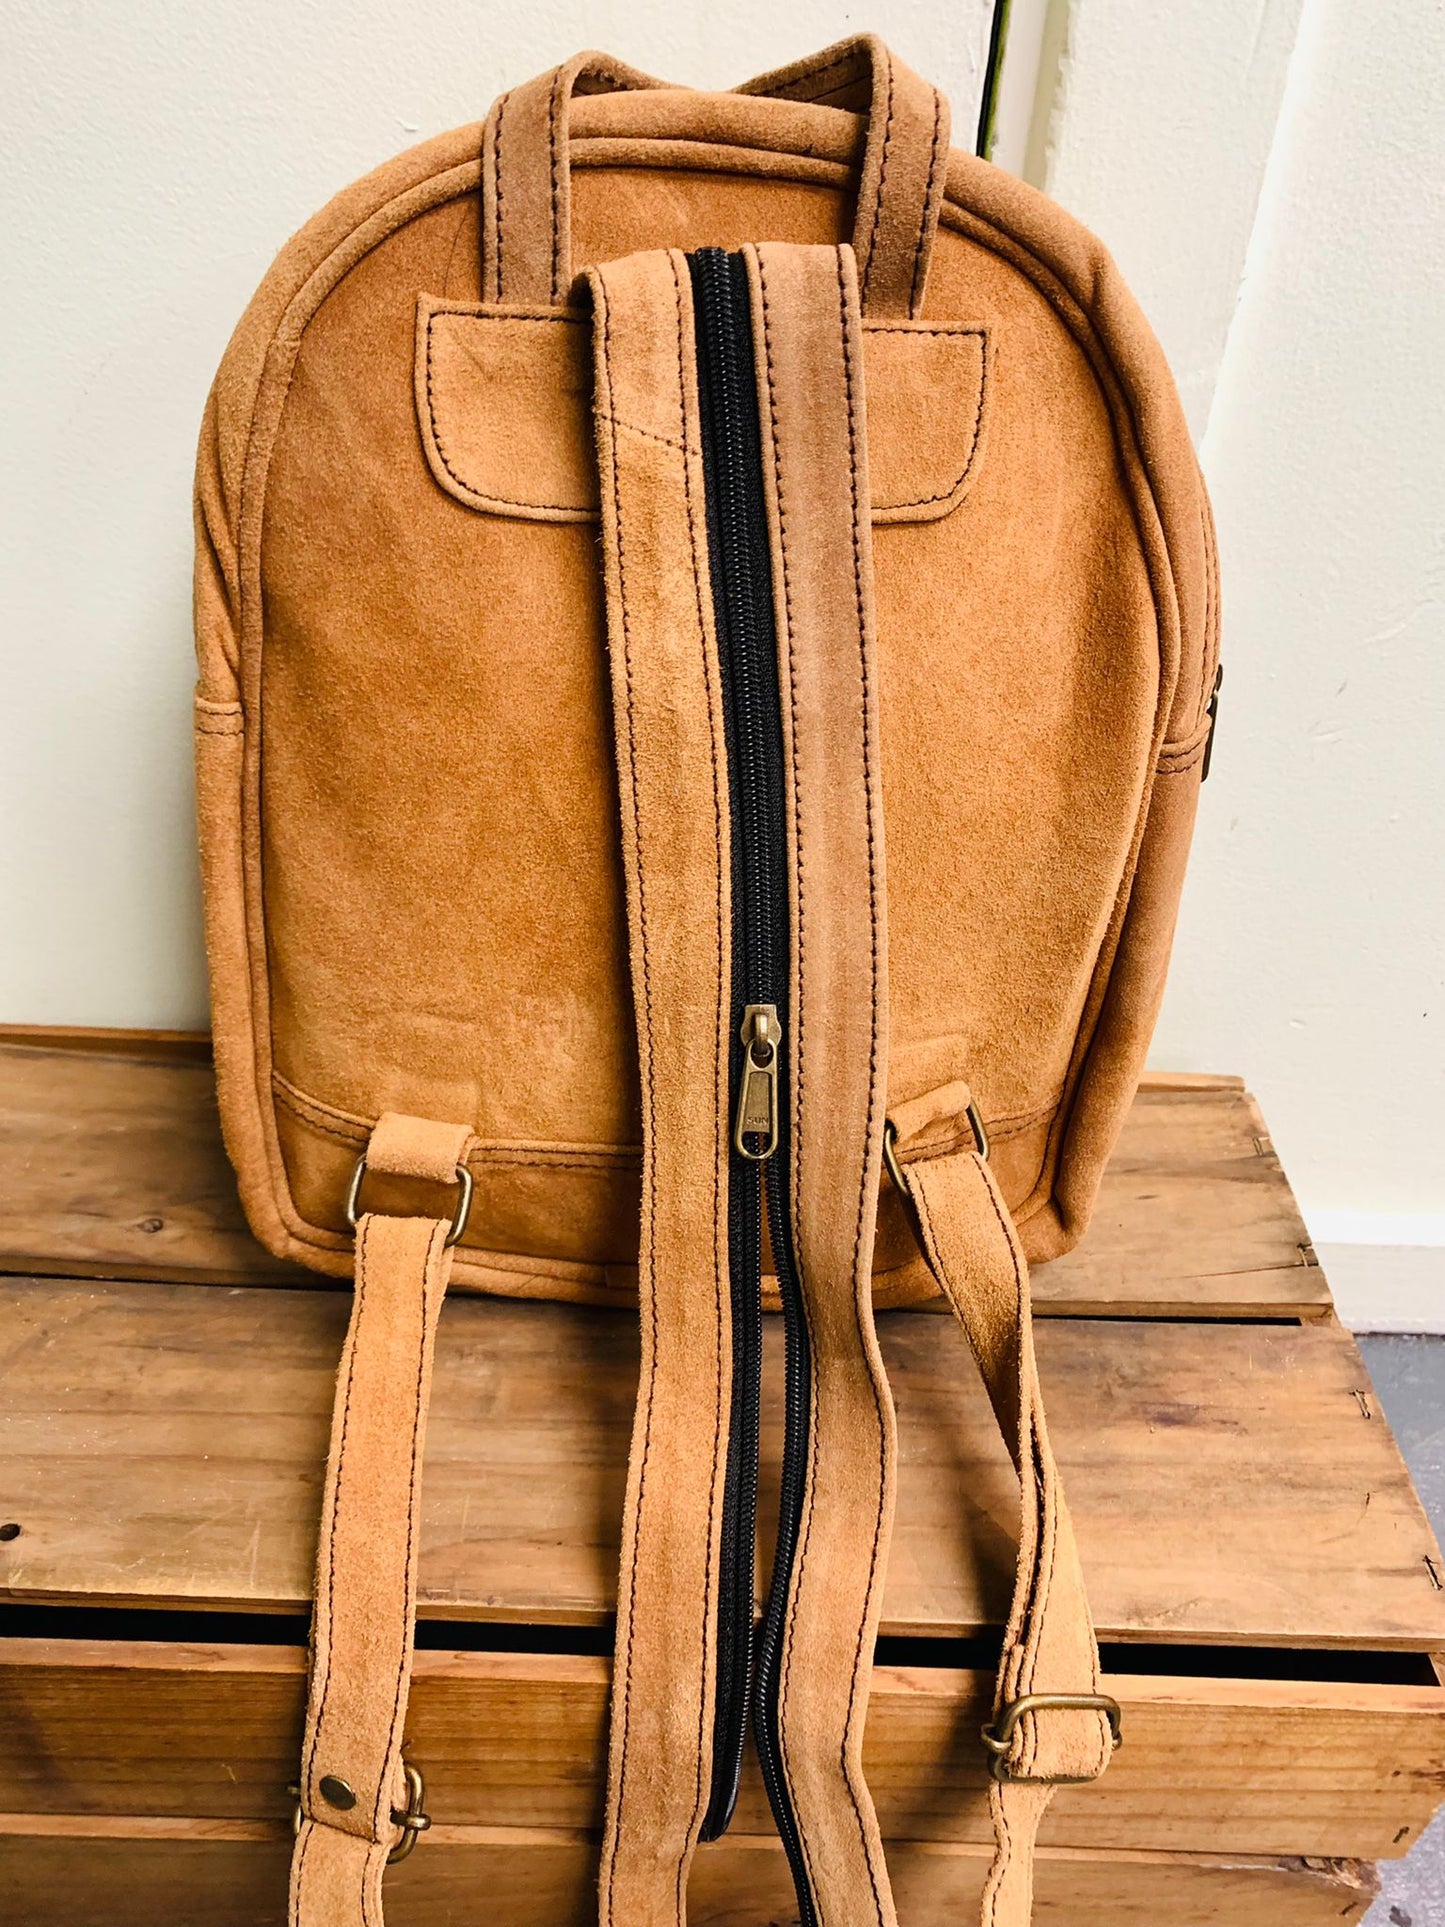 Bohemian style handcrafted Genuine leather Backpack  #5594